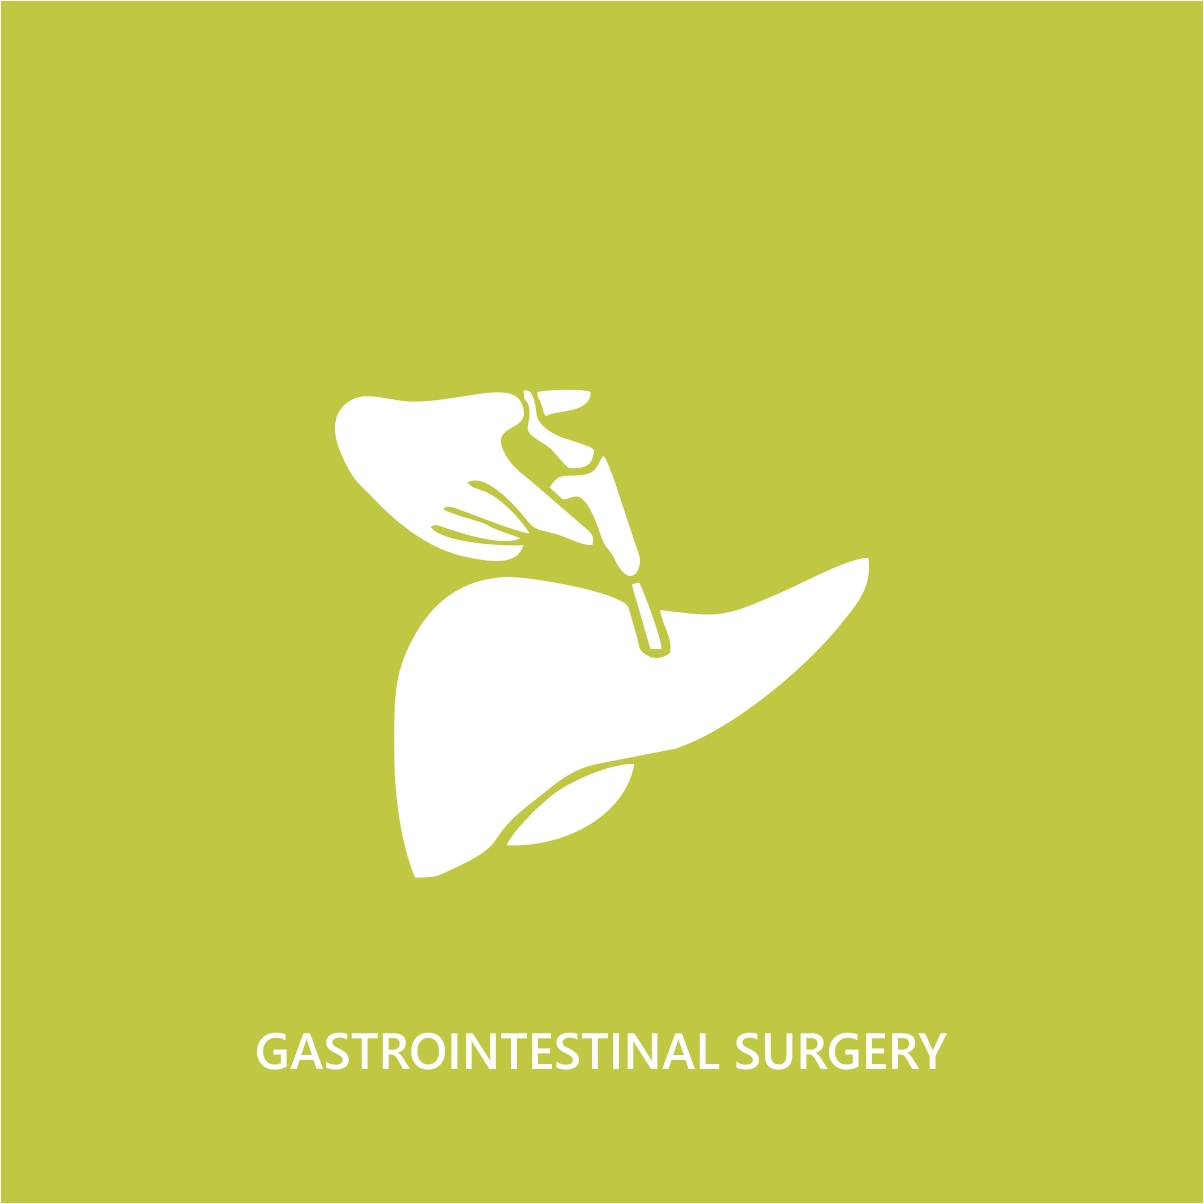 Image of GASTRONIALTESTIC SURGERY